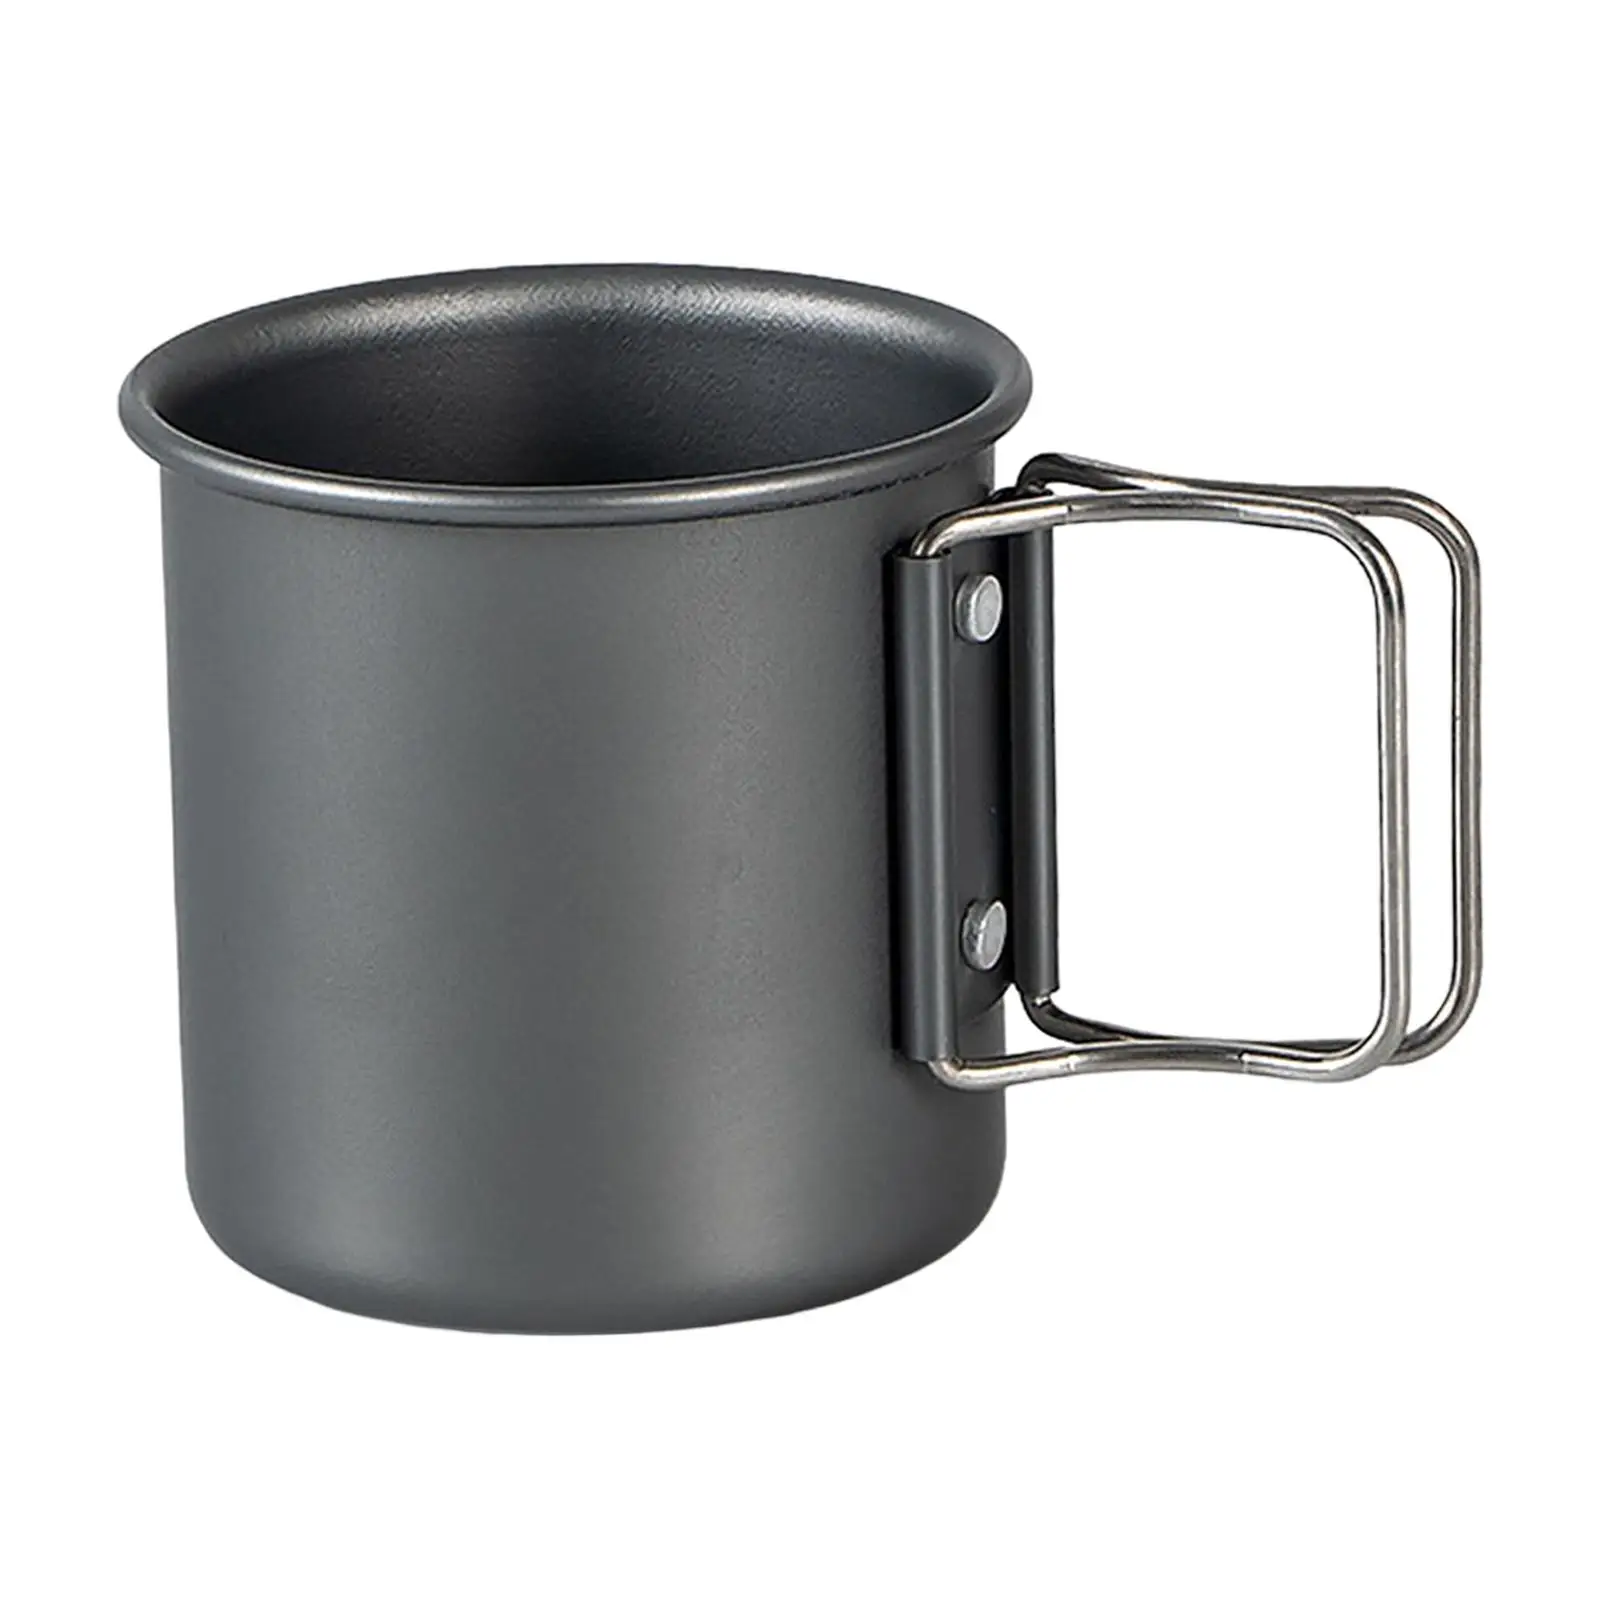 Camping mug cup tableware with foldable handles portable water cup beer mug for